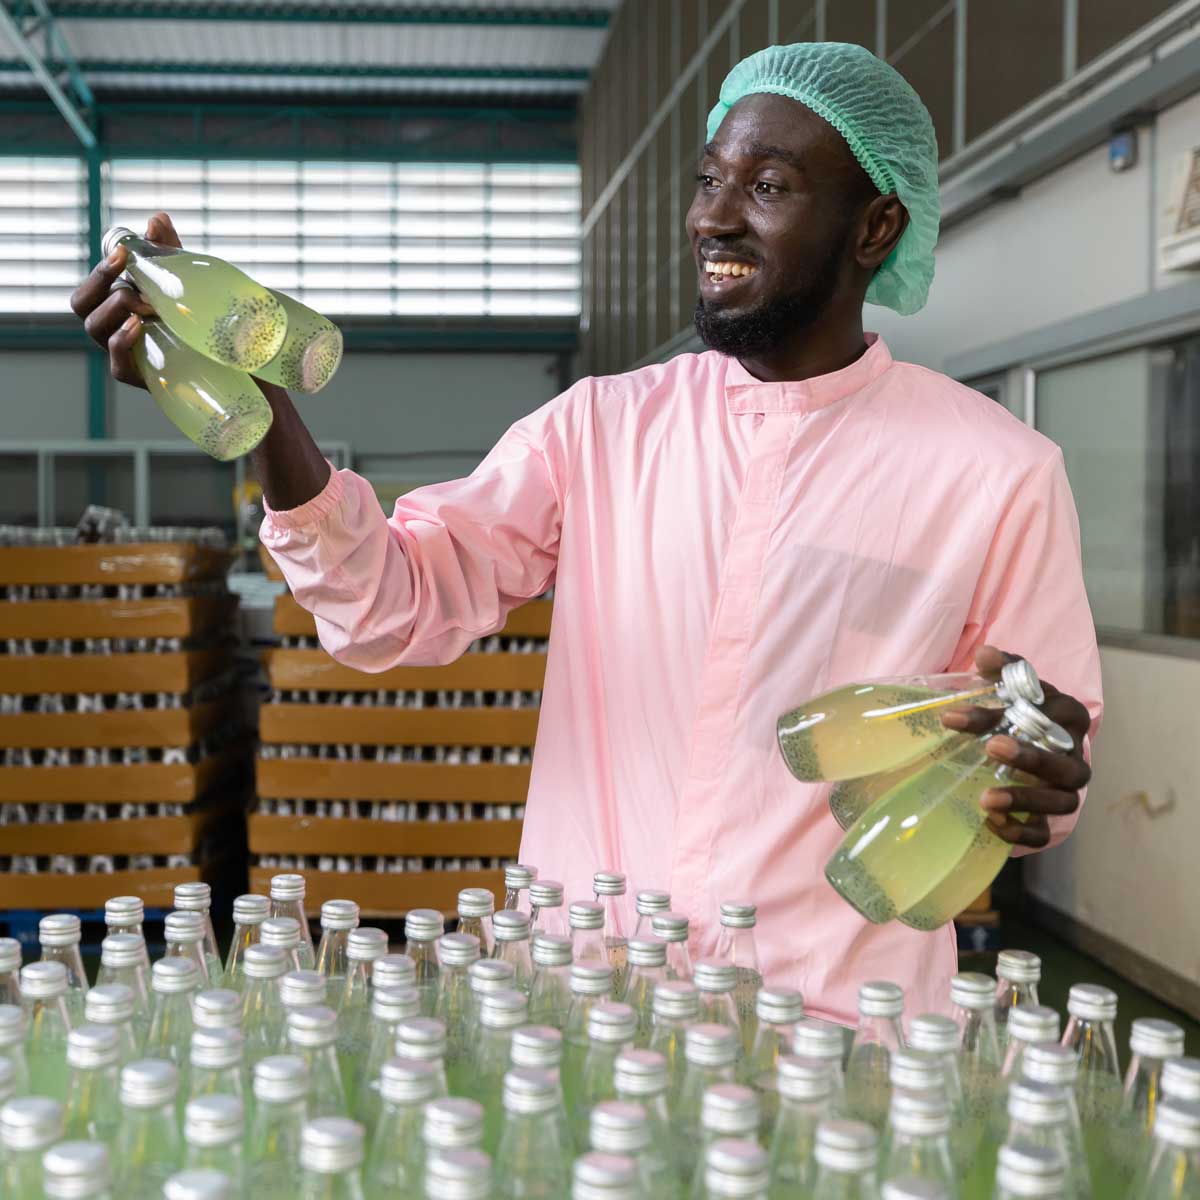 African male factory worker picking up and holding green juice bottle